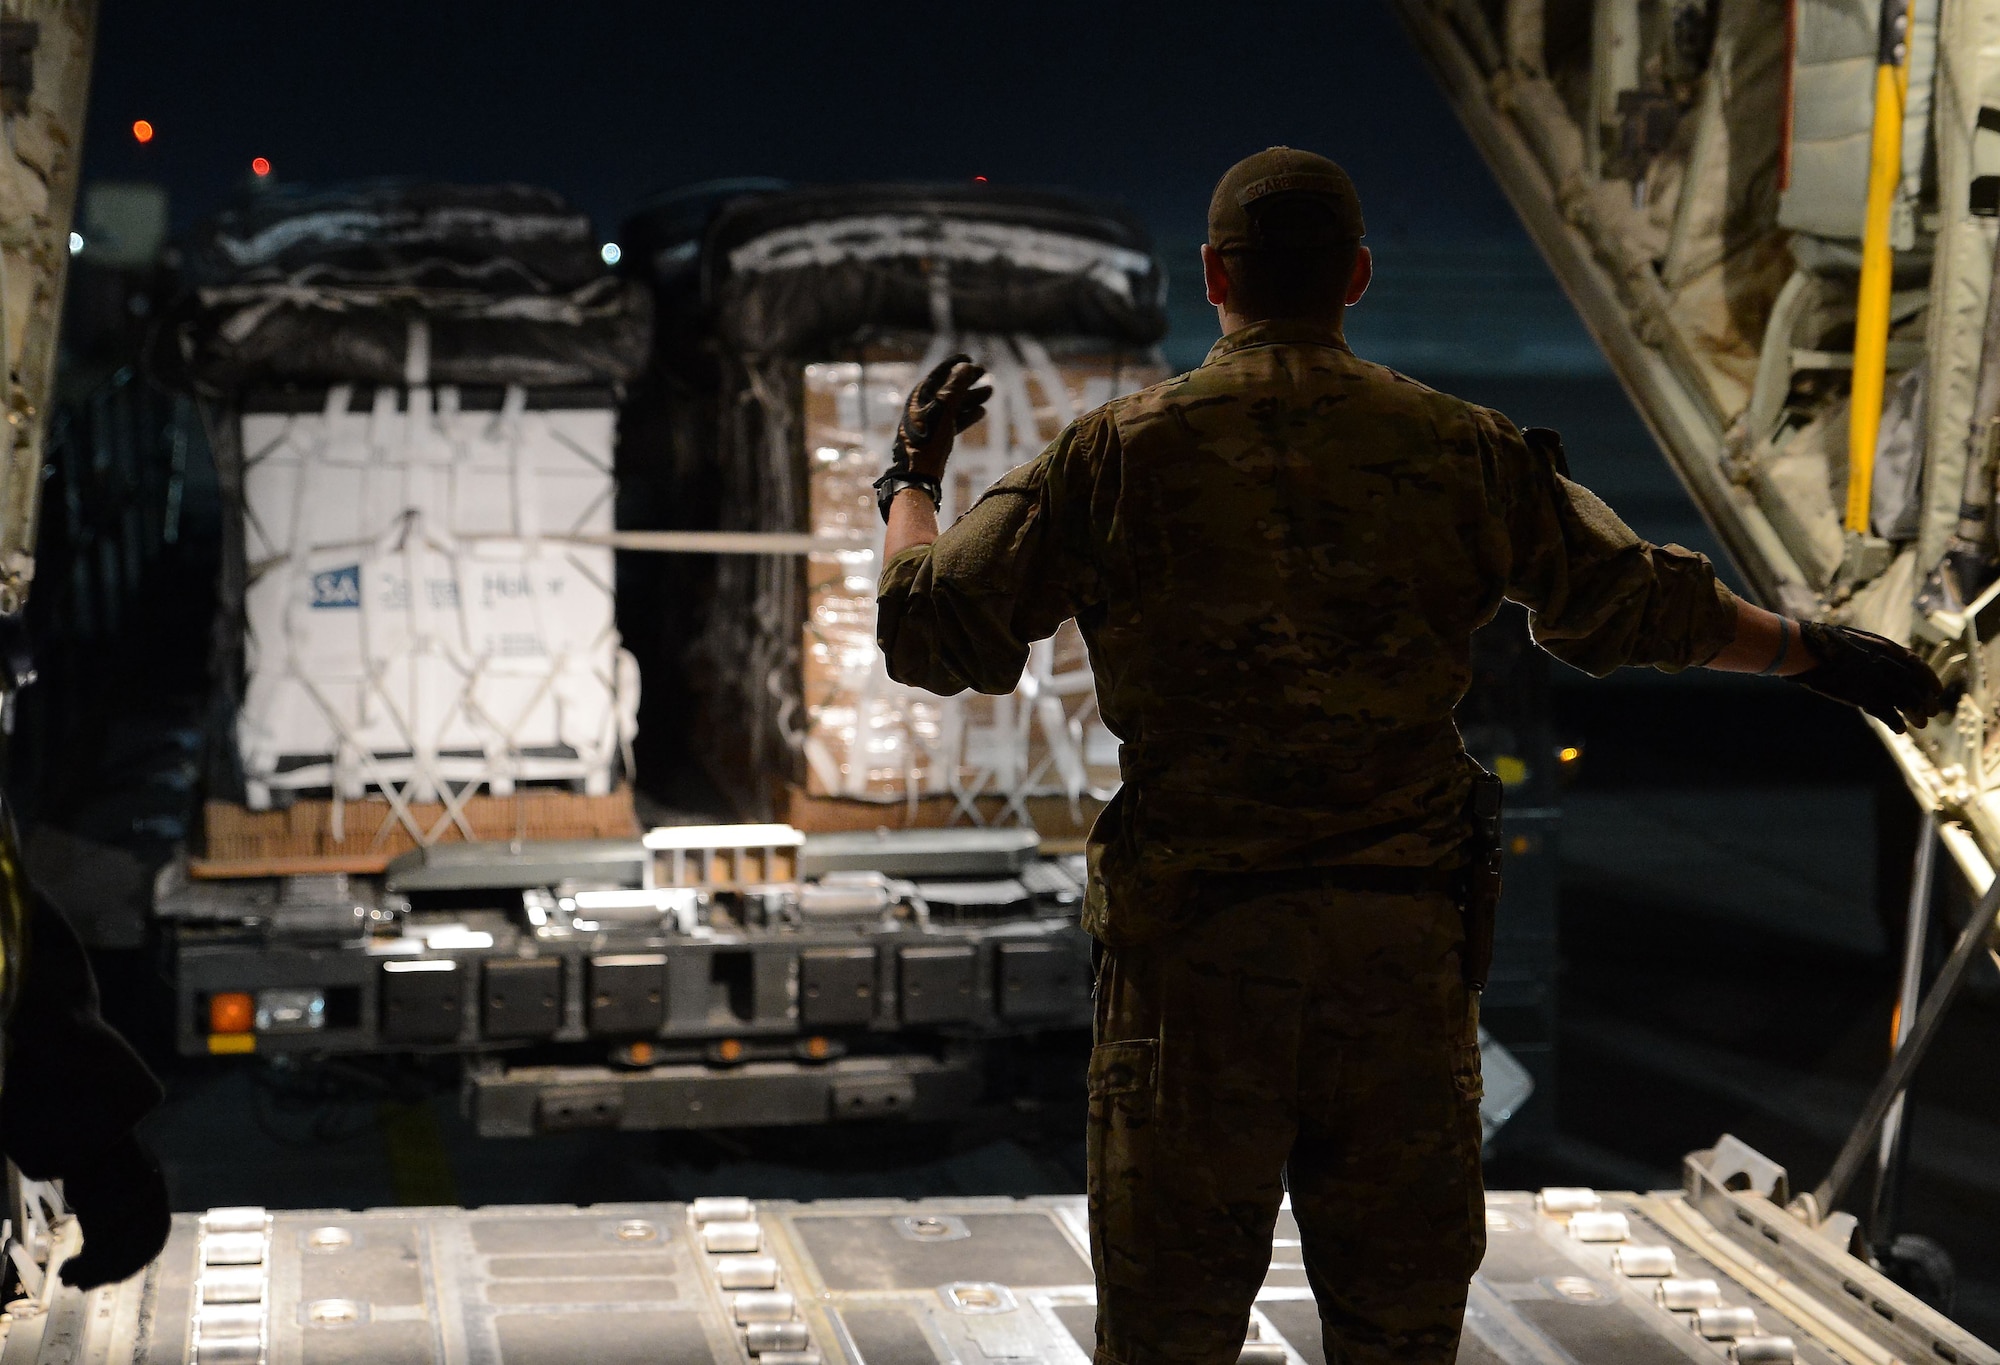 Senior Airman William Scarbrough, 774th Expeditionary Airlift Squadron loadmaster, marshals a forklift onto a C-130J Super Hercules Dec. 13, 2017 at Bagram Airfield, Afghanistan.